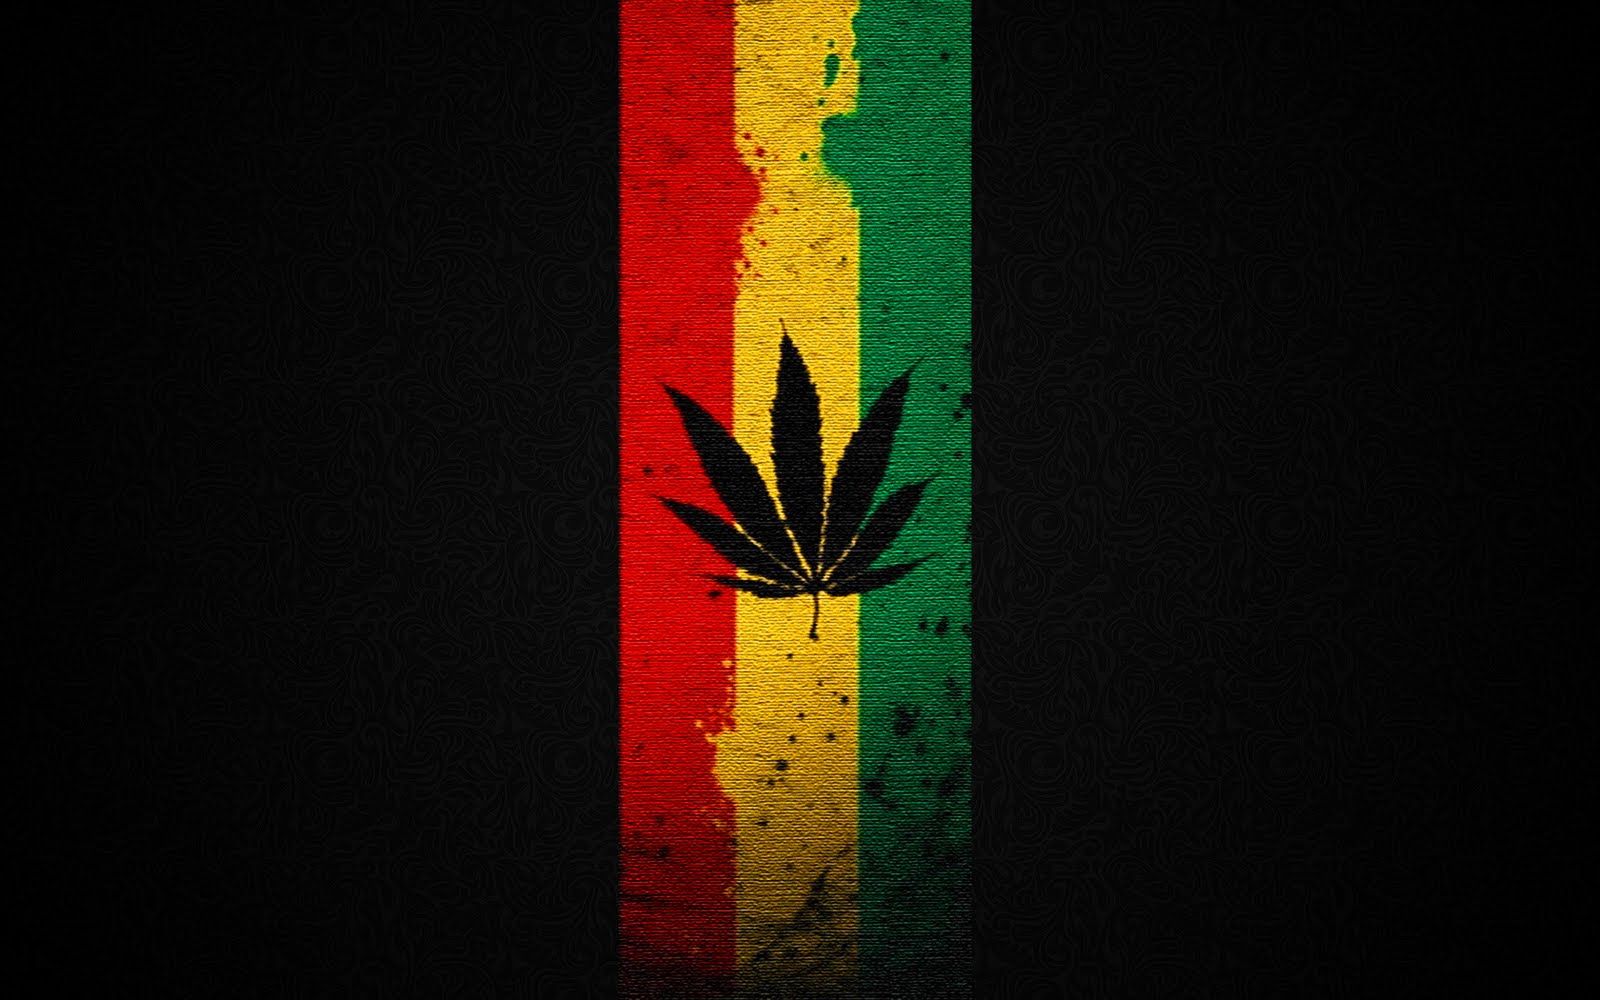 Weed Wallpaper for Windows 10